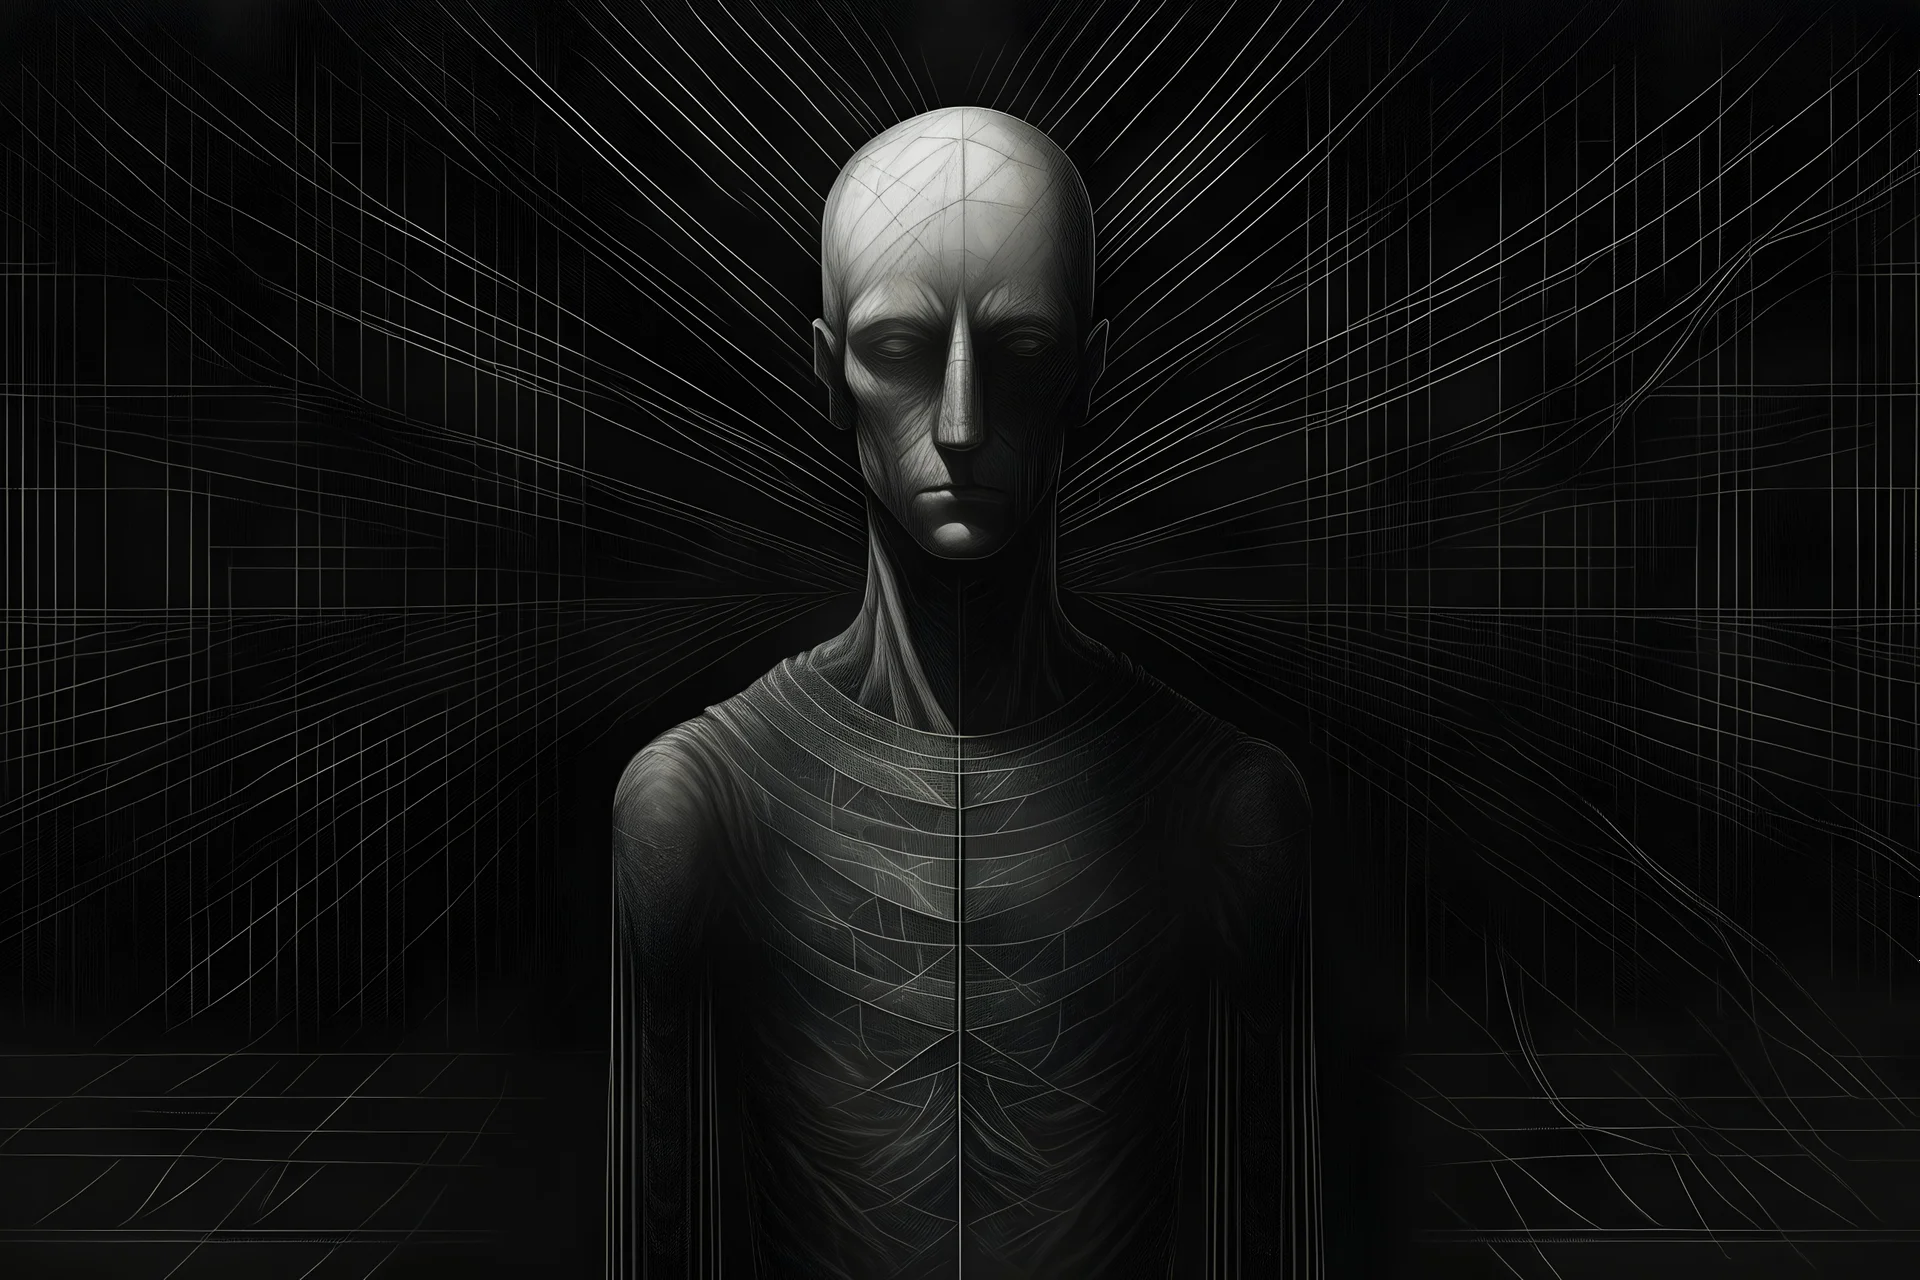 monochrome, cardboard figure on the left of the picture, stocky human figure with a head tilted to the left, almost no neck, no face or hair, schematic drawing, against a dark grey background with a symmetrical pattern, a lighter grey, almost monochrome, in moonlight, crayon drawing in shades of grey and black, ethereal, cinematic postprocessing